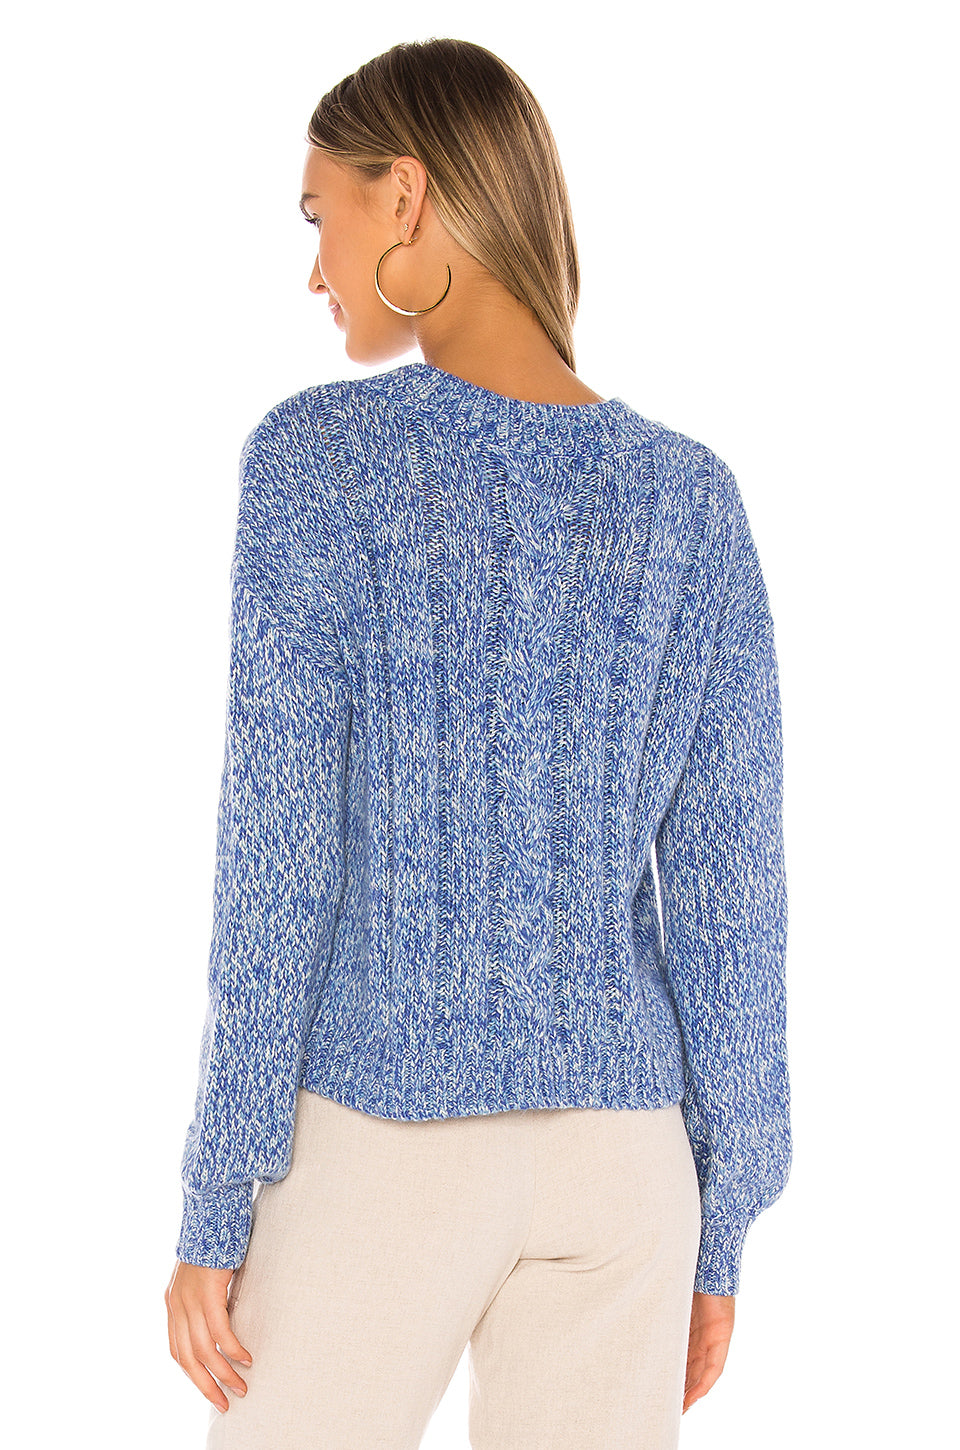 Stormi Sweater in MARLED BLUE